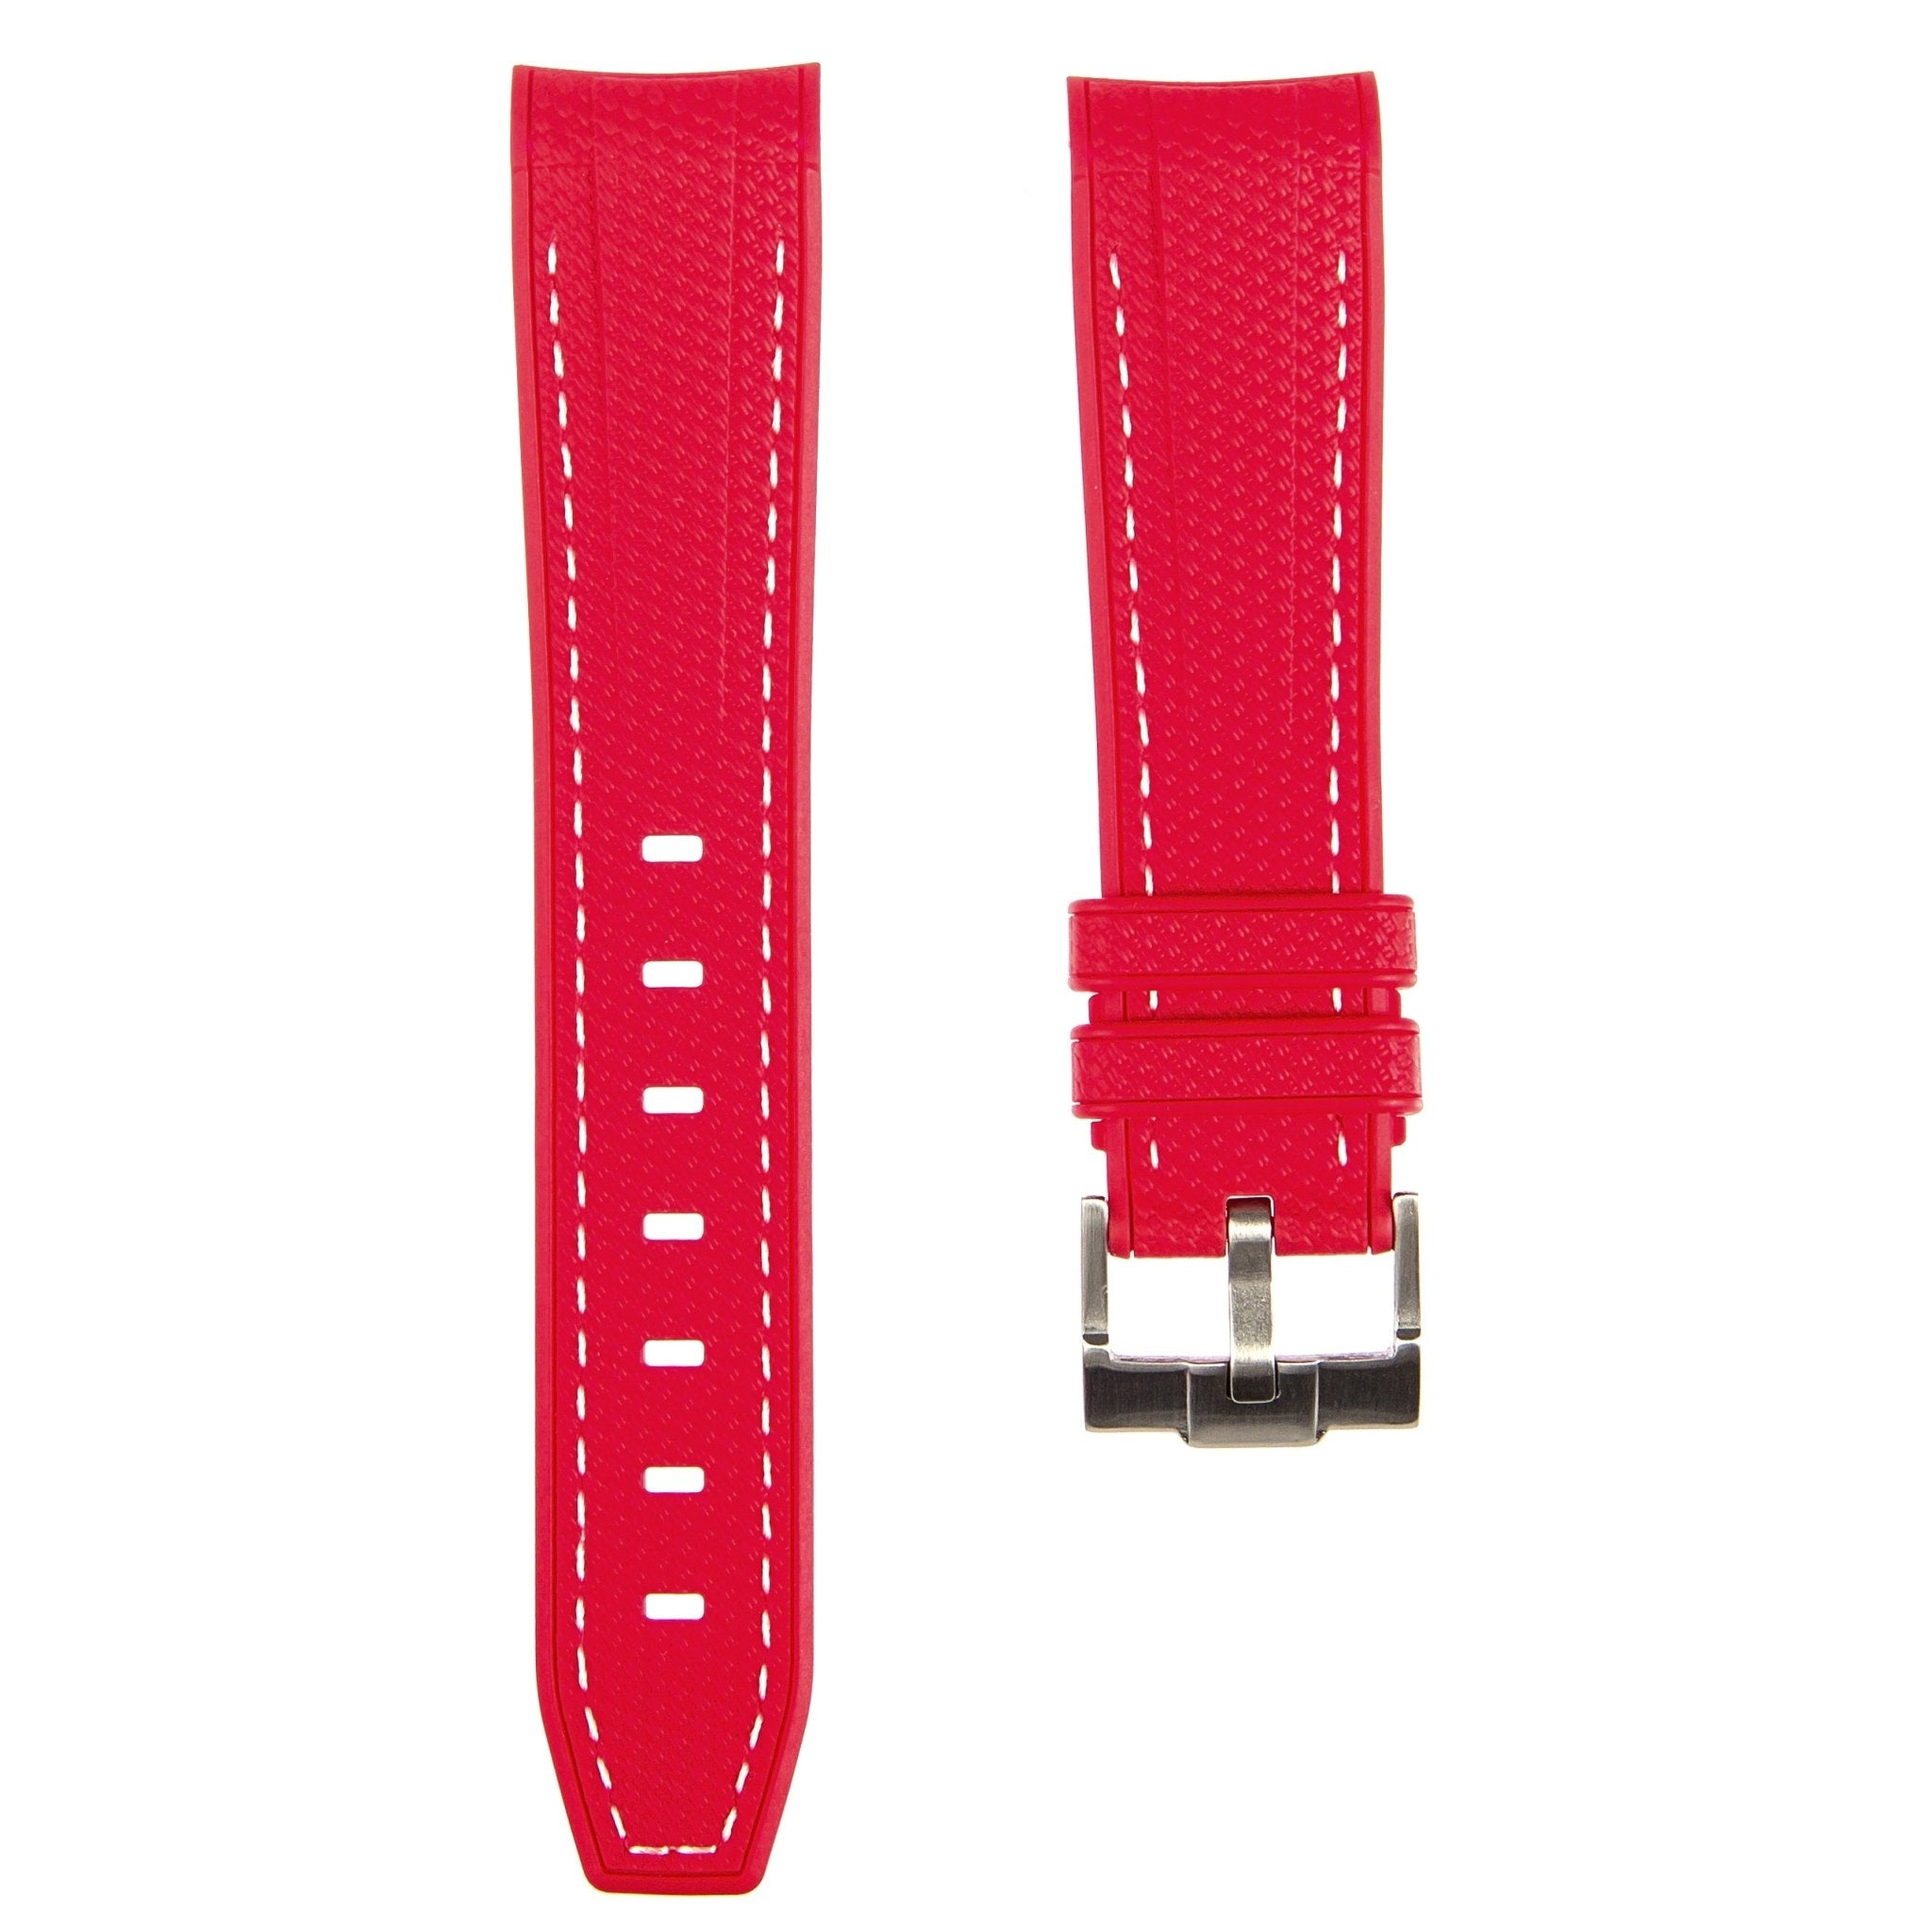 Textured Curved End Premium Silicone Strap - Red with White Stitch (2405) -StrapSeeker